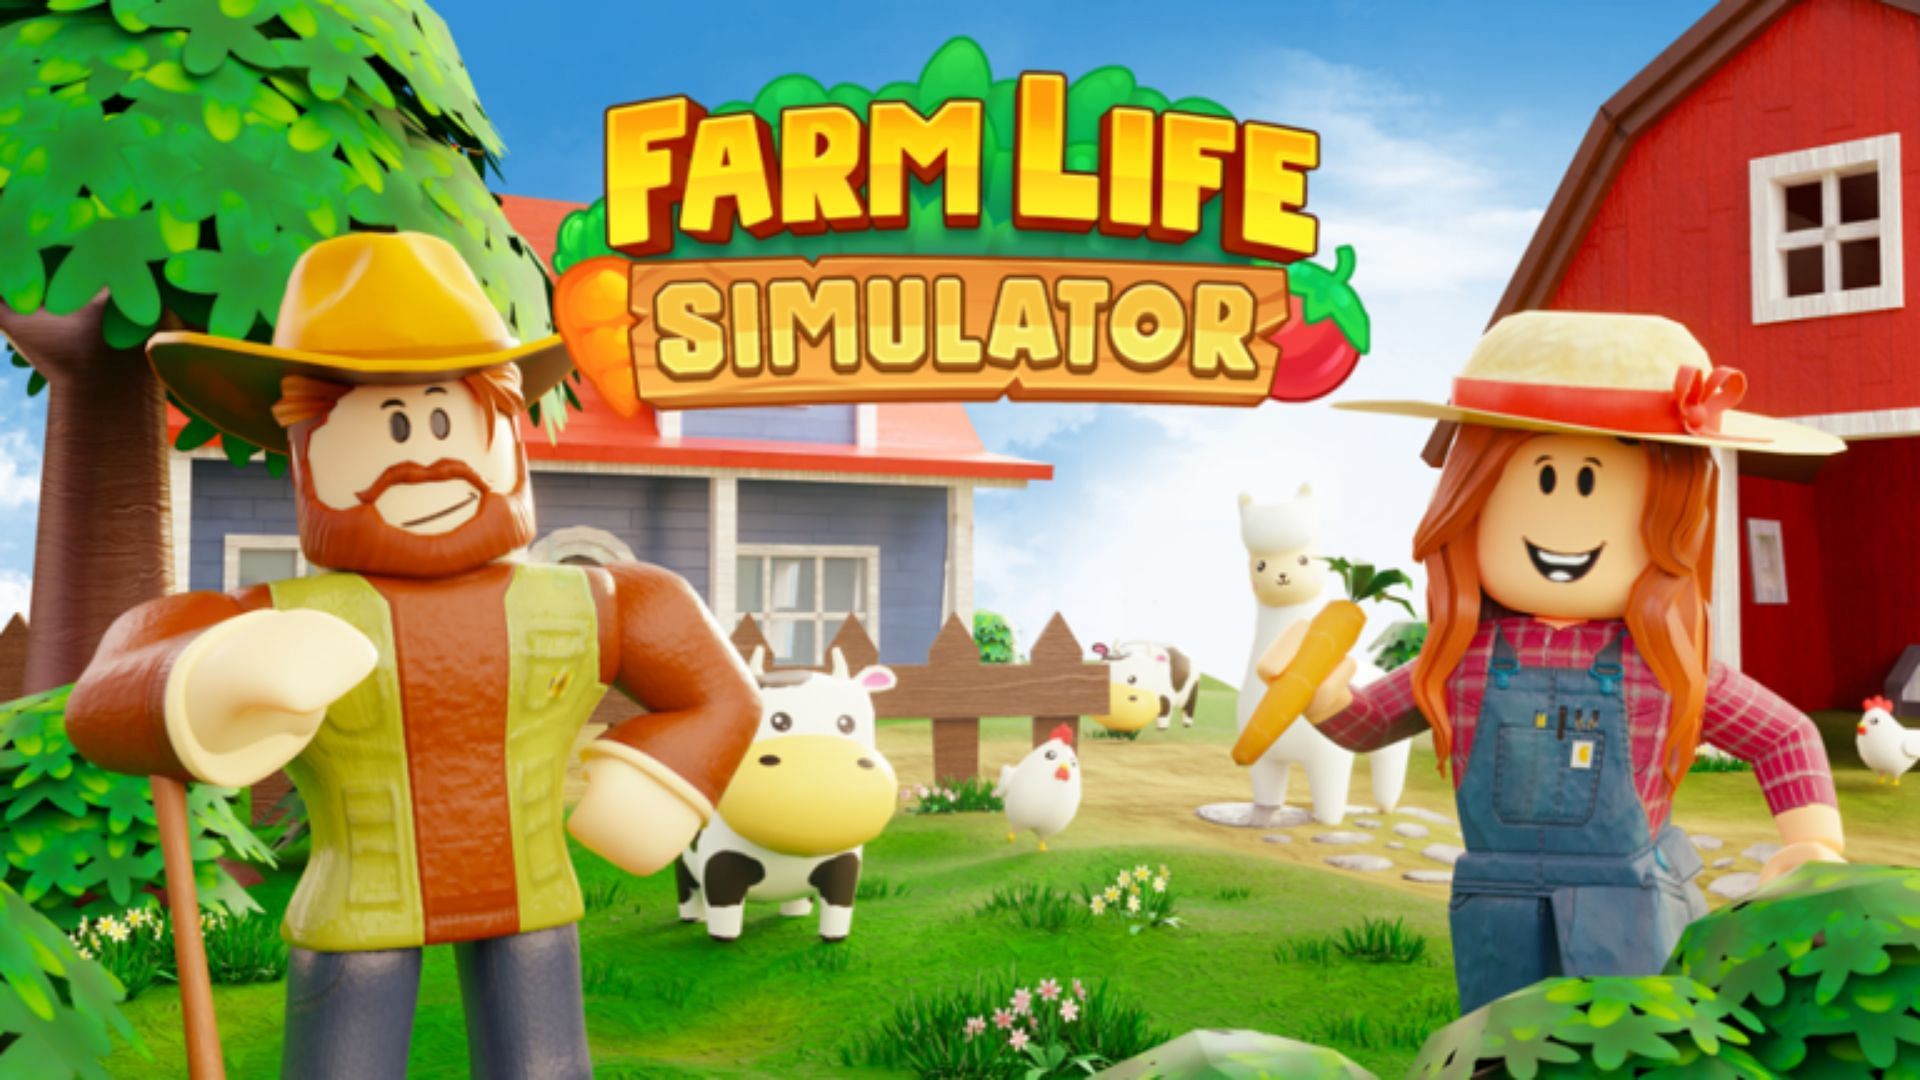 Codes for Farm Life Simulator and their importance (Image via Roblox)